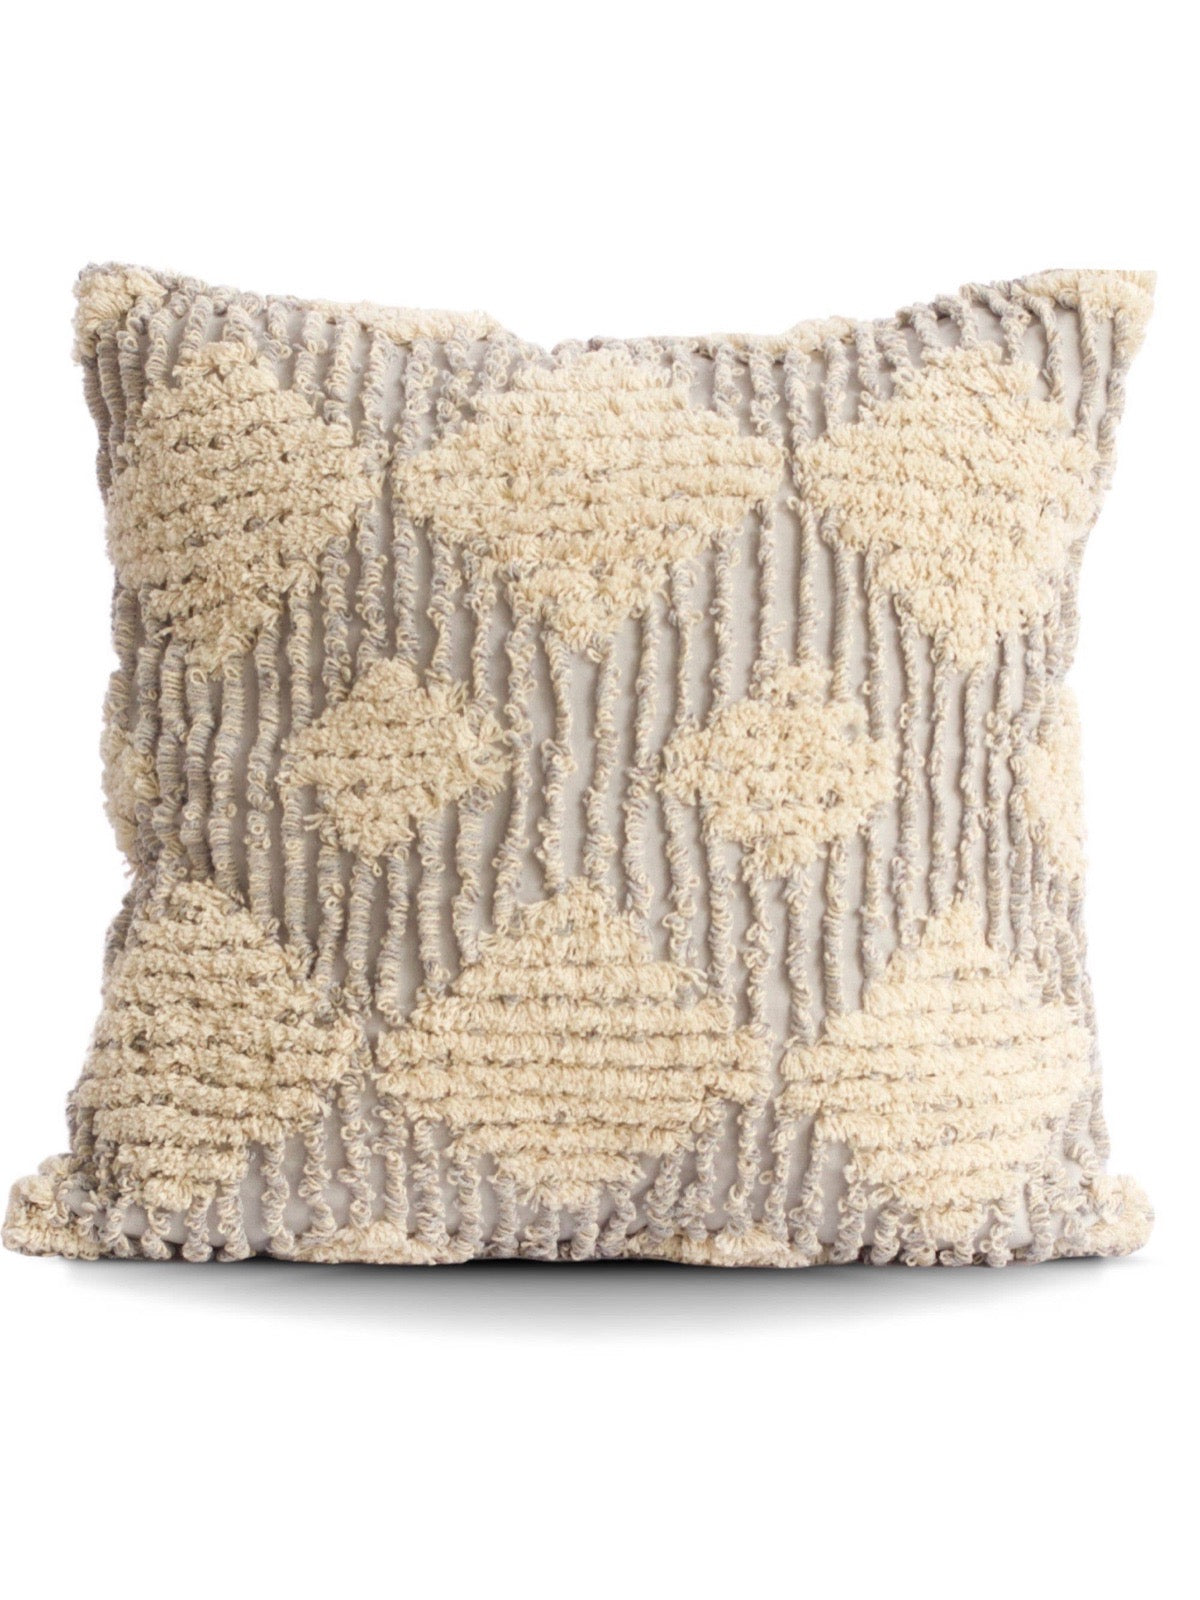 Elevate any space in your home with this Mid Century Diamond Patterned Tufted decorative pillow. The texture and patterning are oh-so-soft on this modern yet classic 100% cotton pillow cover. Sold by KYA Home Decor